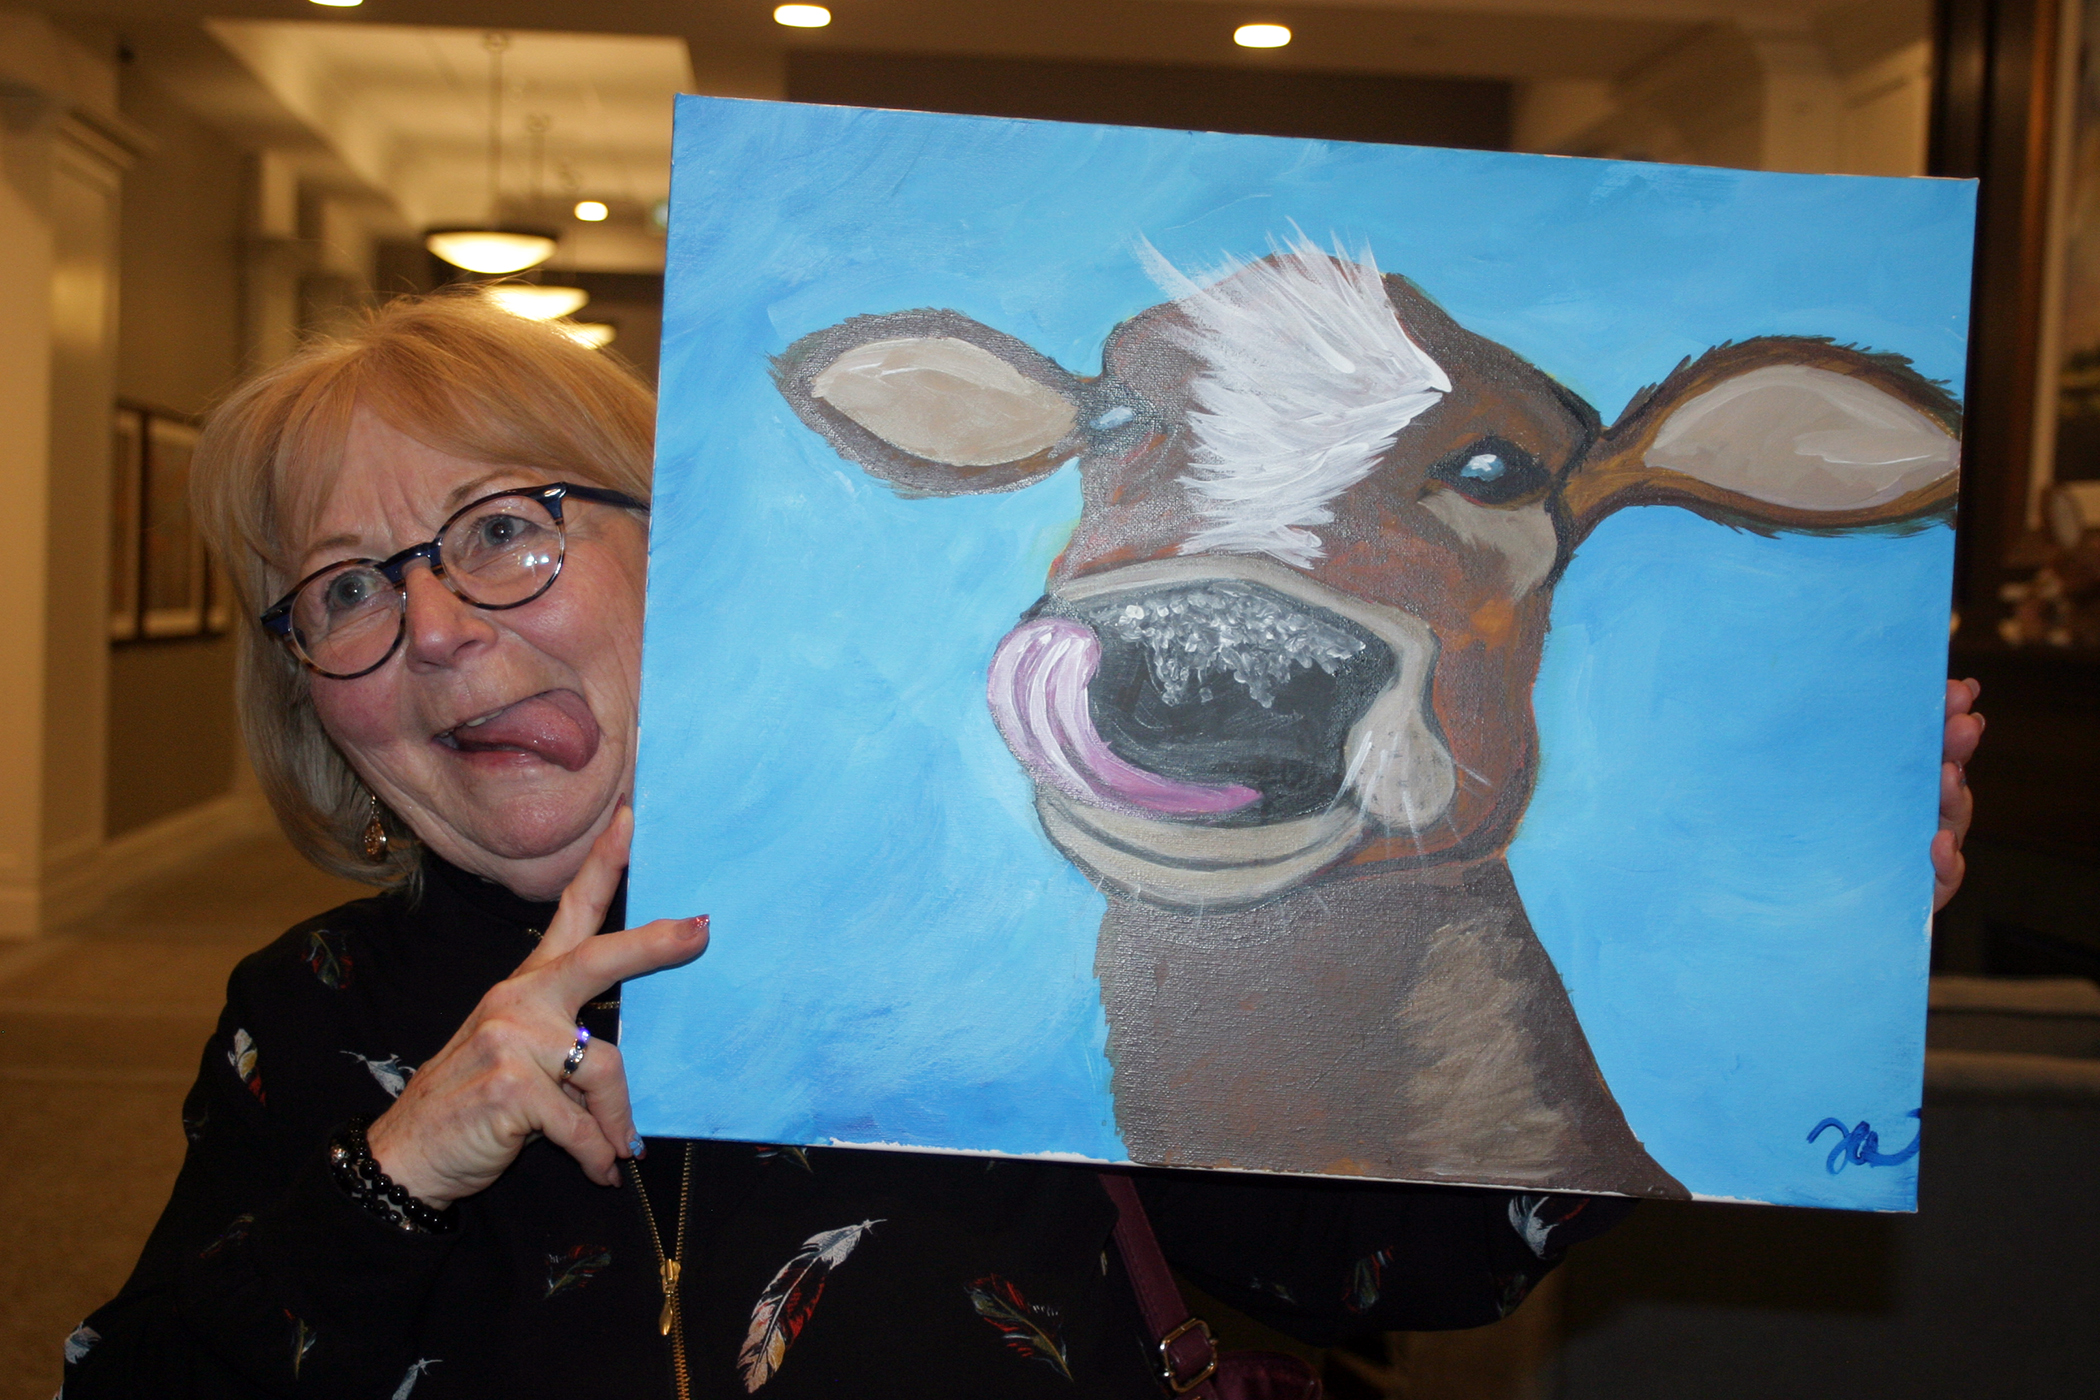 Pam Meunier, doing her best cow painting impression, was the highest bidder on CHA board member Tara Azulay's Paint Night creation. Photo by Jake Davies